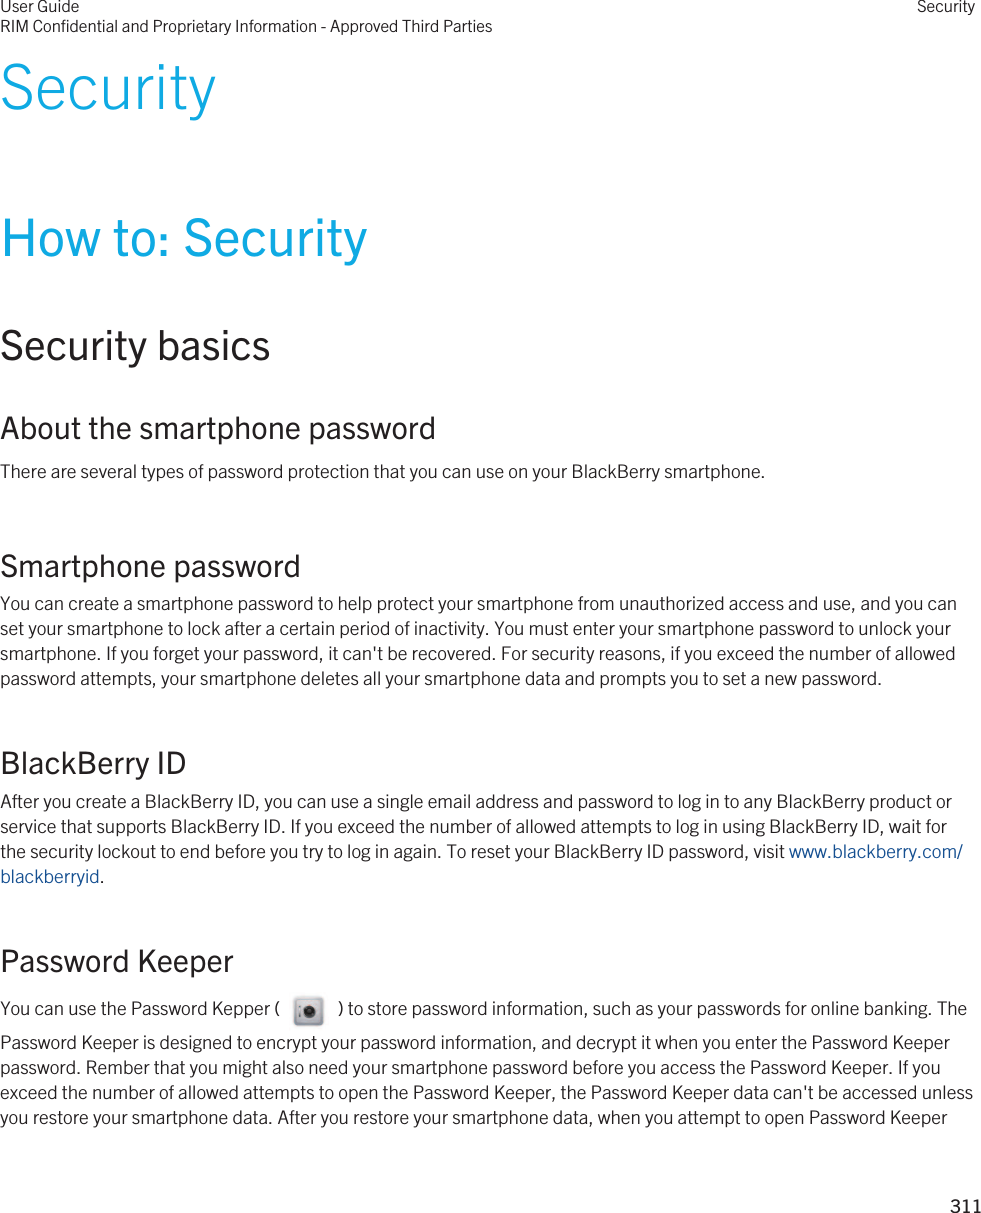 SecurityHow to: SecuritySecurity basicsAbout the smartphone passwordThere are several types of password protection that you can use on your BlackBerry smartphone.Smartphone passwordYou can create a smartphone password to help protect your smartphone from unauthorized access and use, and you can set your smartphone to lock after a certain period of inactivity. You must enter your smartphone password to unlock your smartphone. If you forget your password, it can&apos;t be recovered. For security reasons, if you exceed the number of allowed password attempts, your smartphone deletes all your smartphone data and prompts you to set a new password.BlackBerry IDAfter you create a BlackBerry ID, you can use a single email address and password to log in to any BlackBerry product or service that supports BlackBerry ID. If you exceed the number of allowed attempts to log in using BlackBerry ID, wait for the security lockout to end before you try to log in again. To reset your BlackBerry ID password, visit www.blackberry.com/blackberryid.Password KeeperYou can use the Password Kepper (     ) to store password information, such as your passwords for online banking. The Password Keeper is designed to encrypt your password information, and decrypt it when you enter the Password Keeper password. Rember that you might also need your smartphone password before you access the Password Keeper. If you exceed the number of allowed attempts to open the Password Keeper, the Password Keeper data can&apos;t be accessed unless you restore your smartphone data. After you restore your smartphone data, when you attempt to open Password Keeper User GuideRIM Confidential and Proprietary Information - Approved Third PartiesSecurity311 